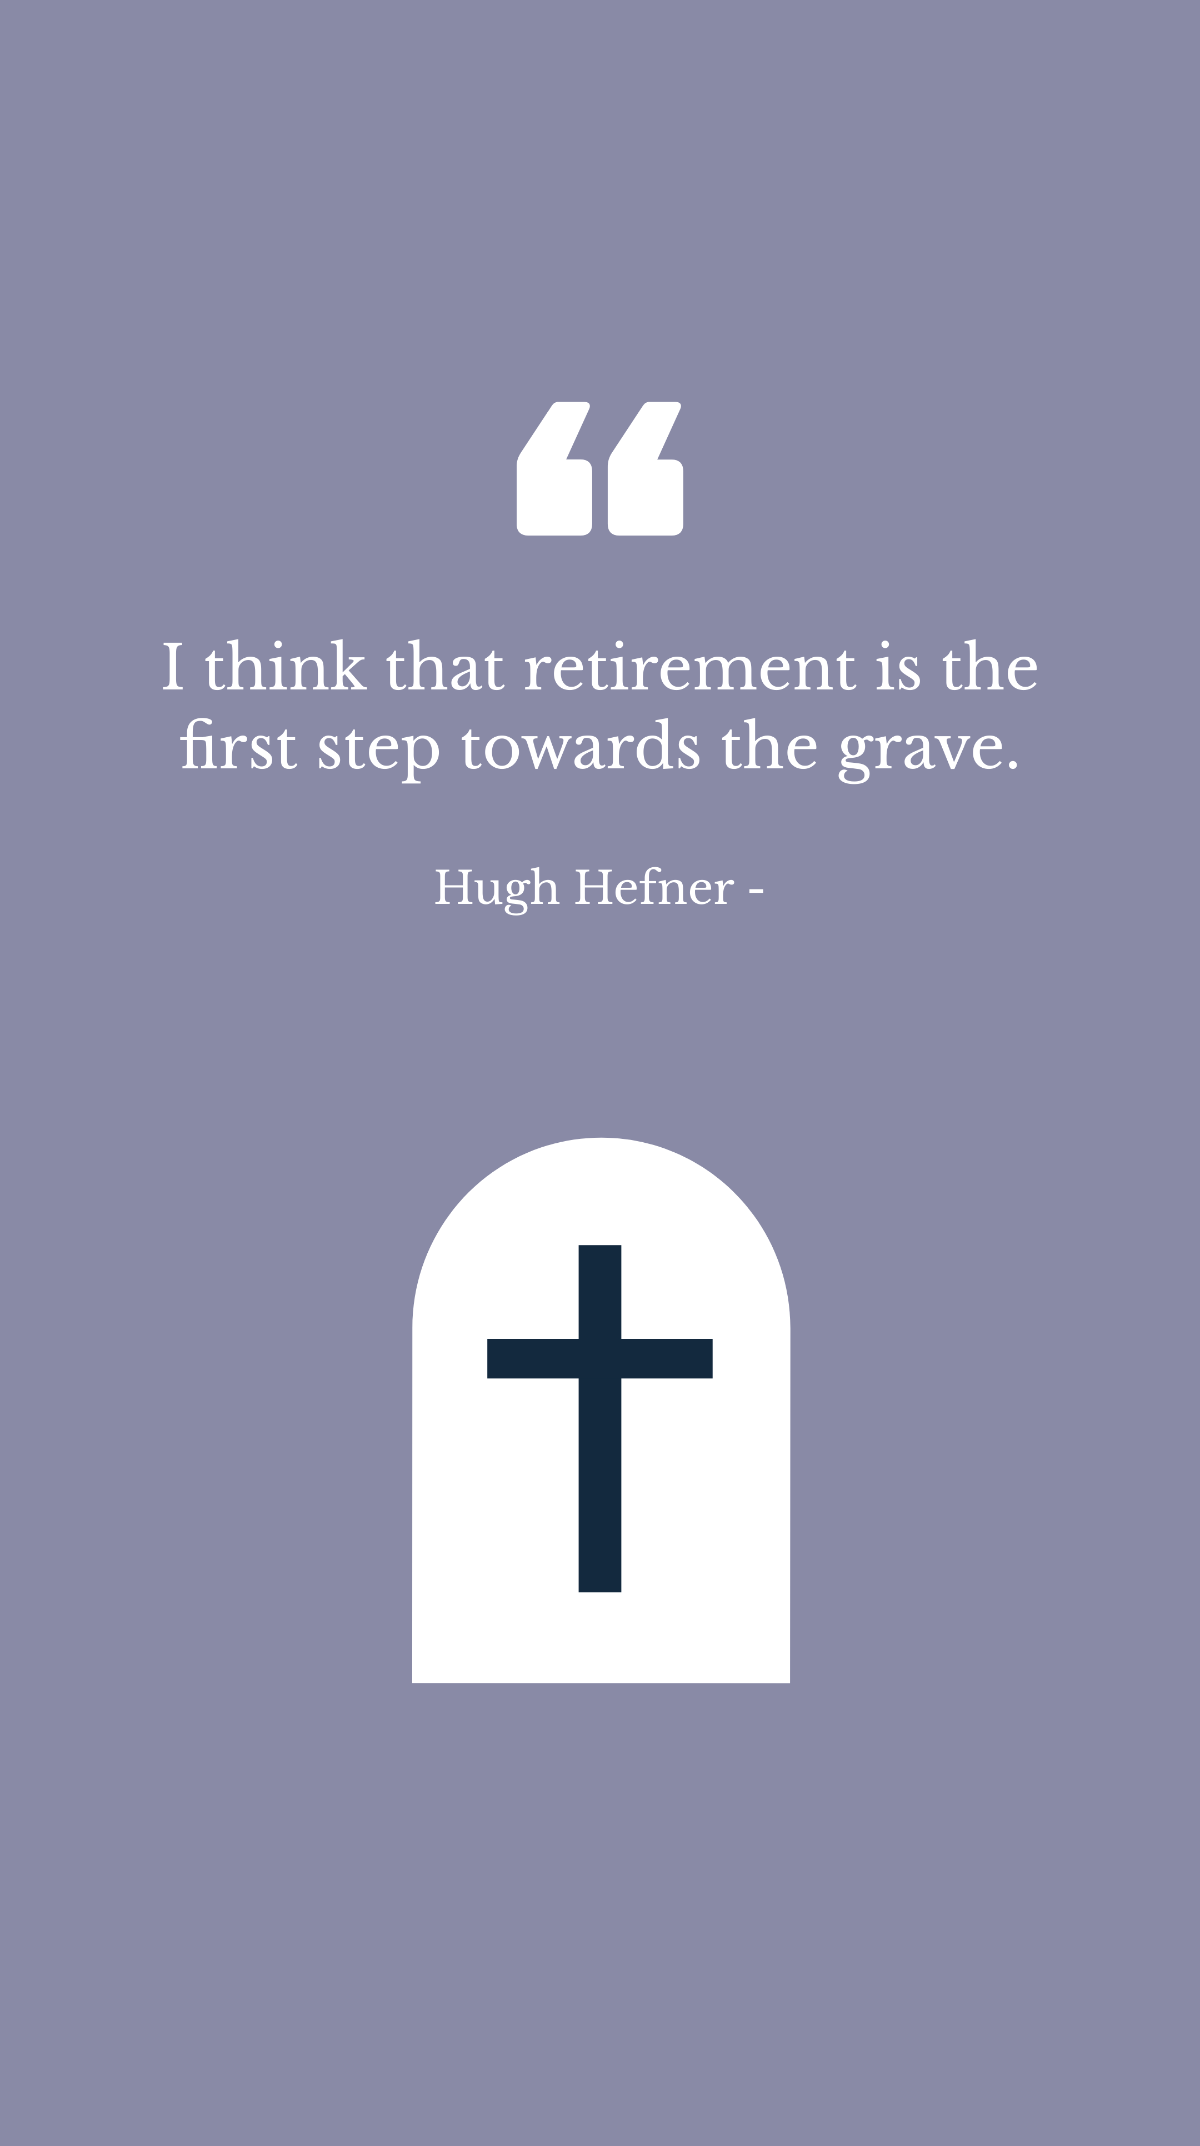 Hugh Hefner - I think that retirement is the first step towards the grave.